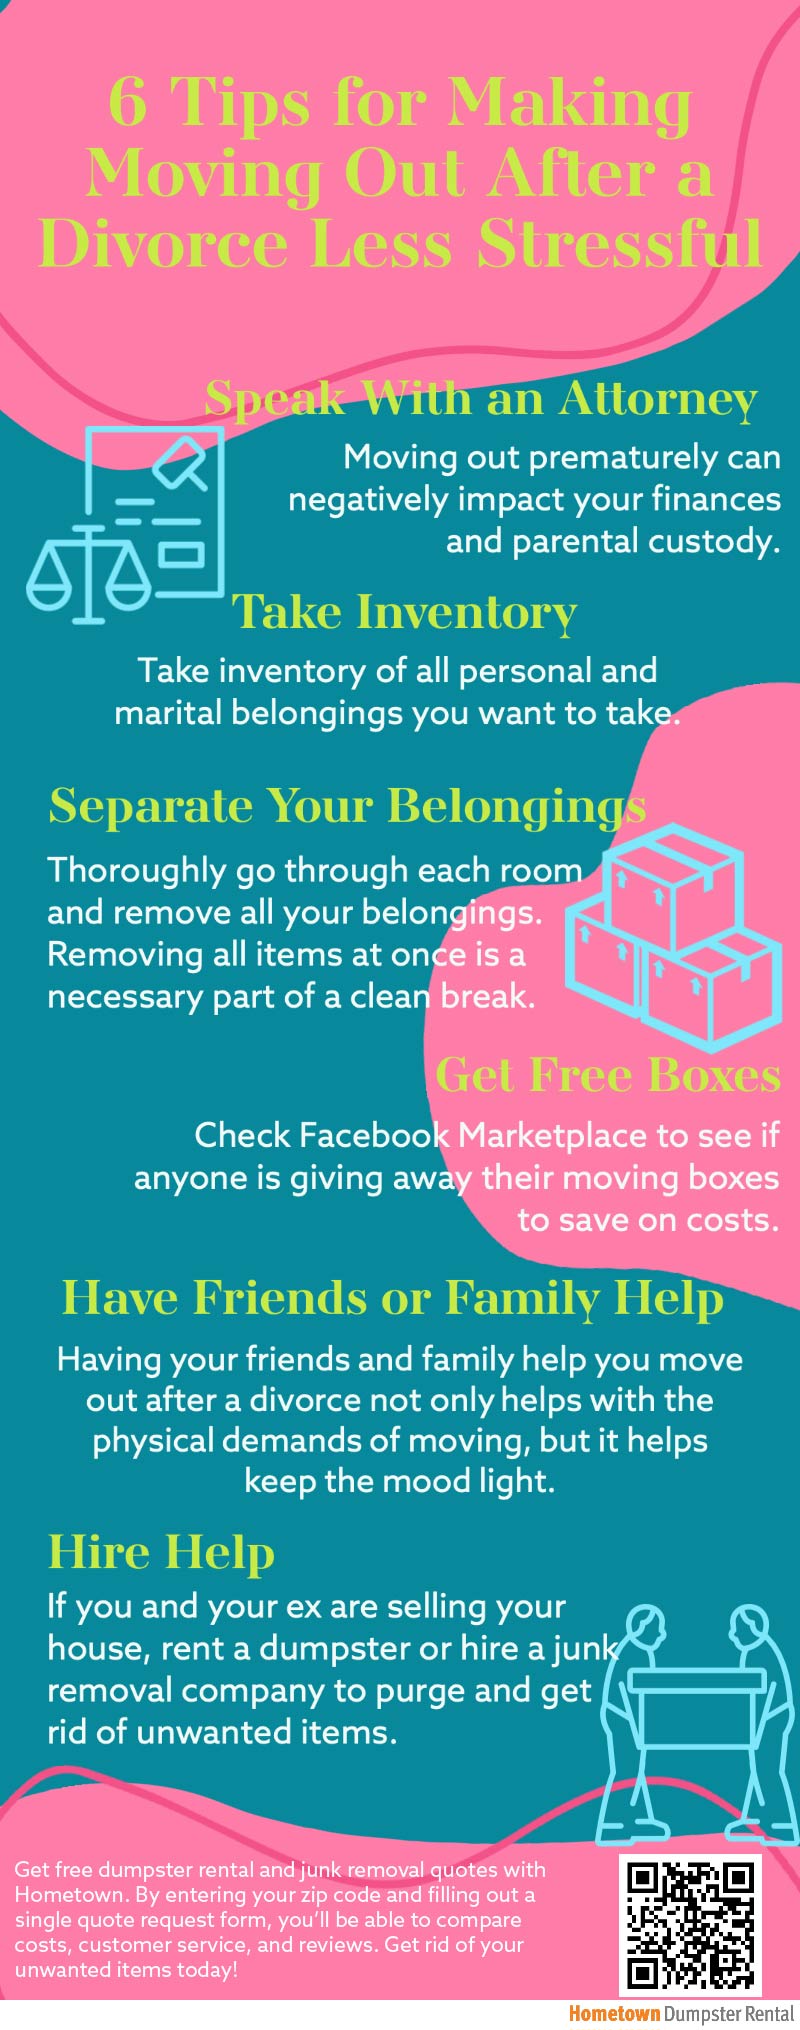 6 Tips for Making Moving Out After a Divorce Less Stressful Infographic